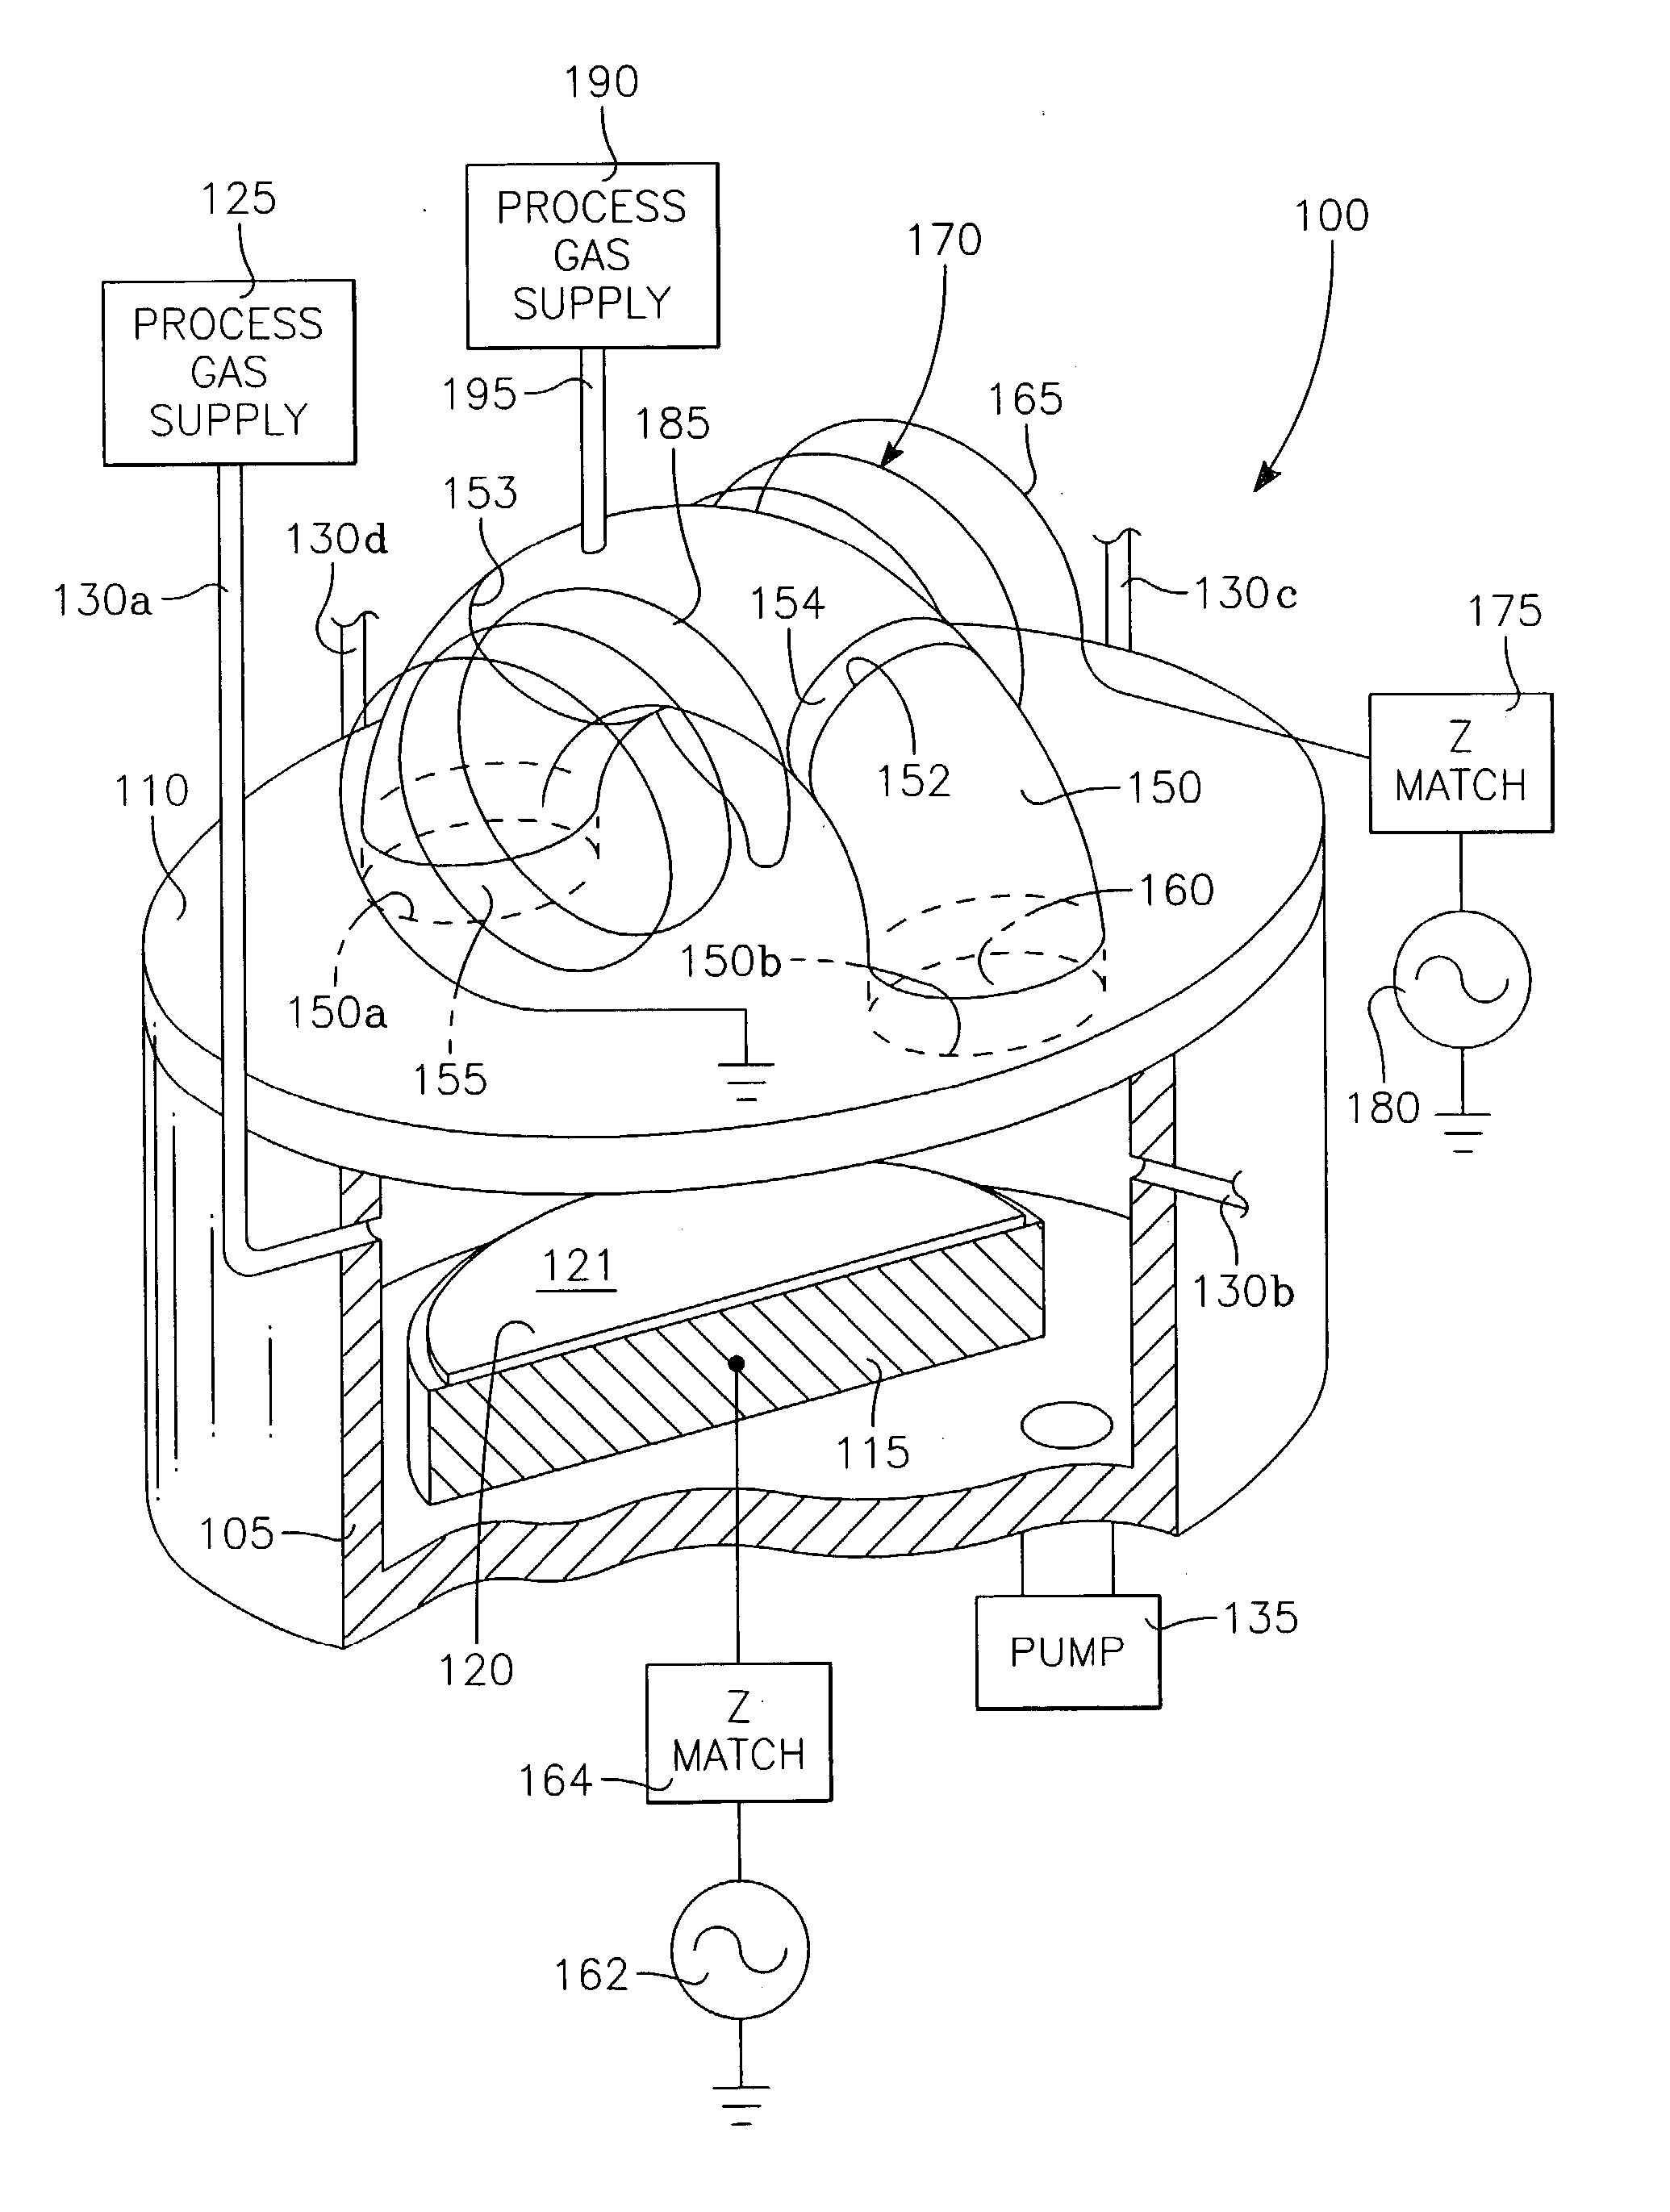 Method to drive spatially separate resonant structure with spatially distinct plasma secondaries using a single generator and switching elements